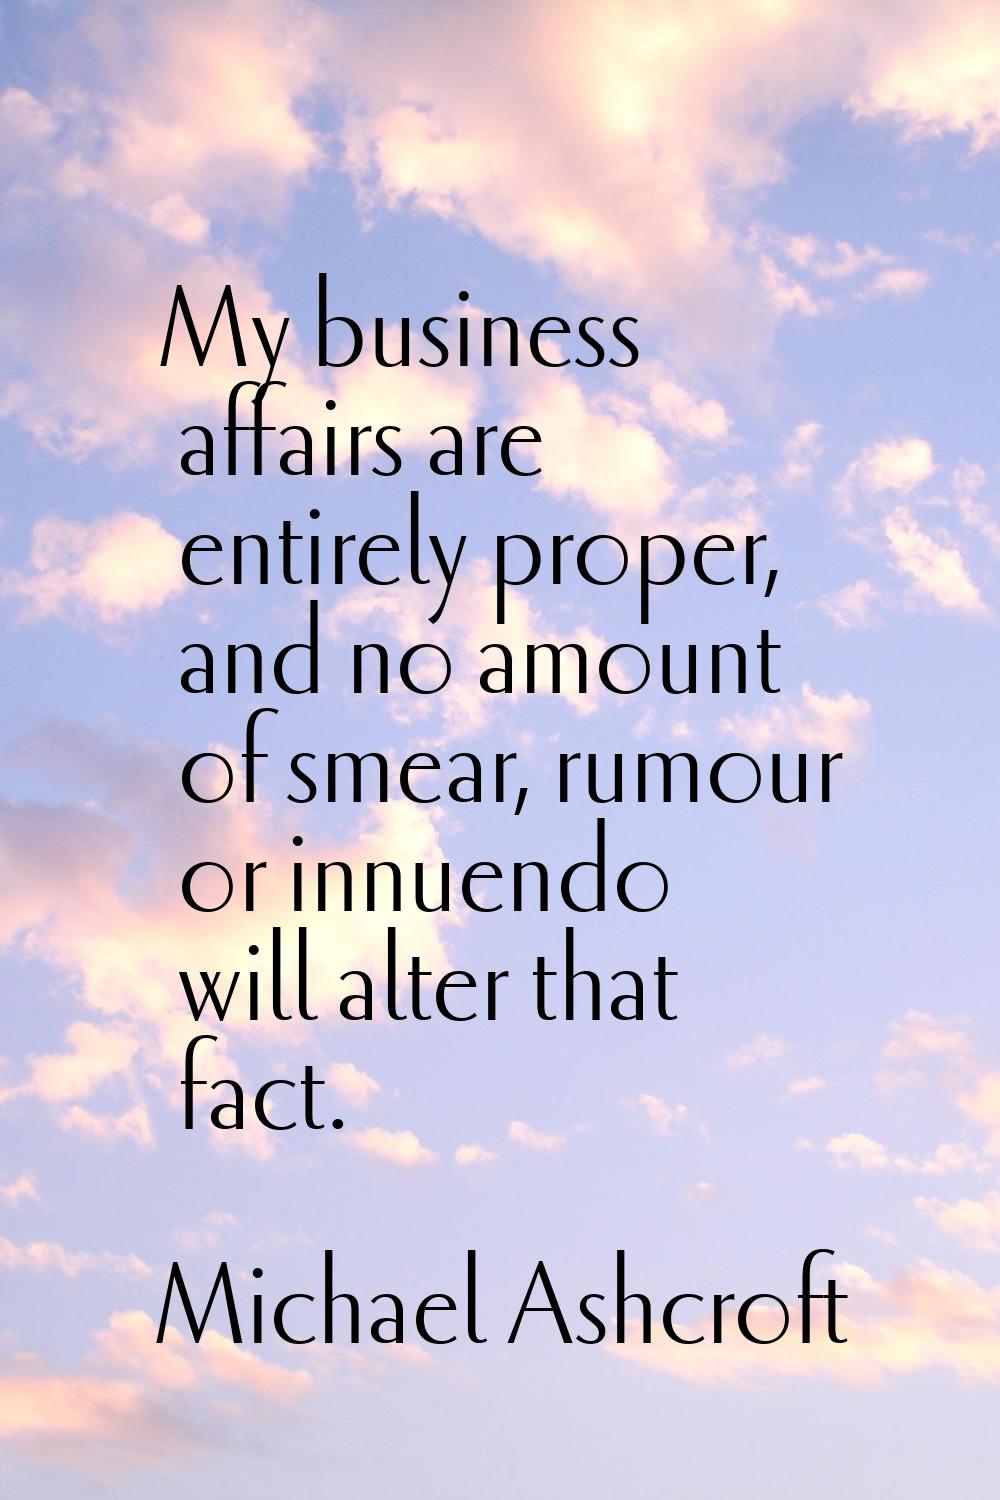 My business affairs are entirely proper, and no amount of smear, rumour or innuendo will alter that